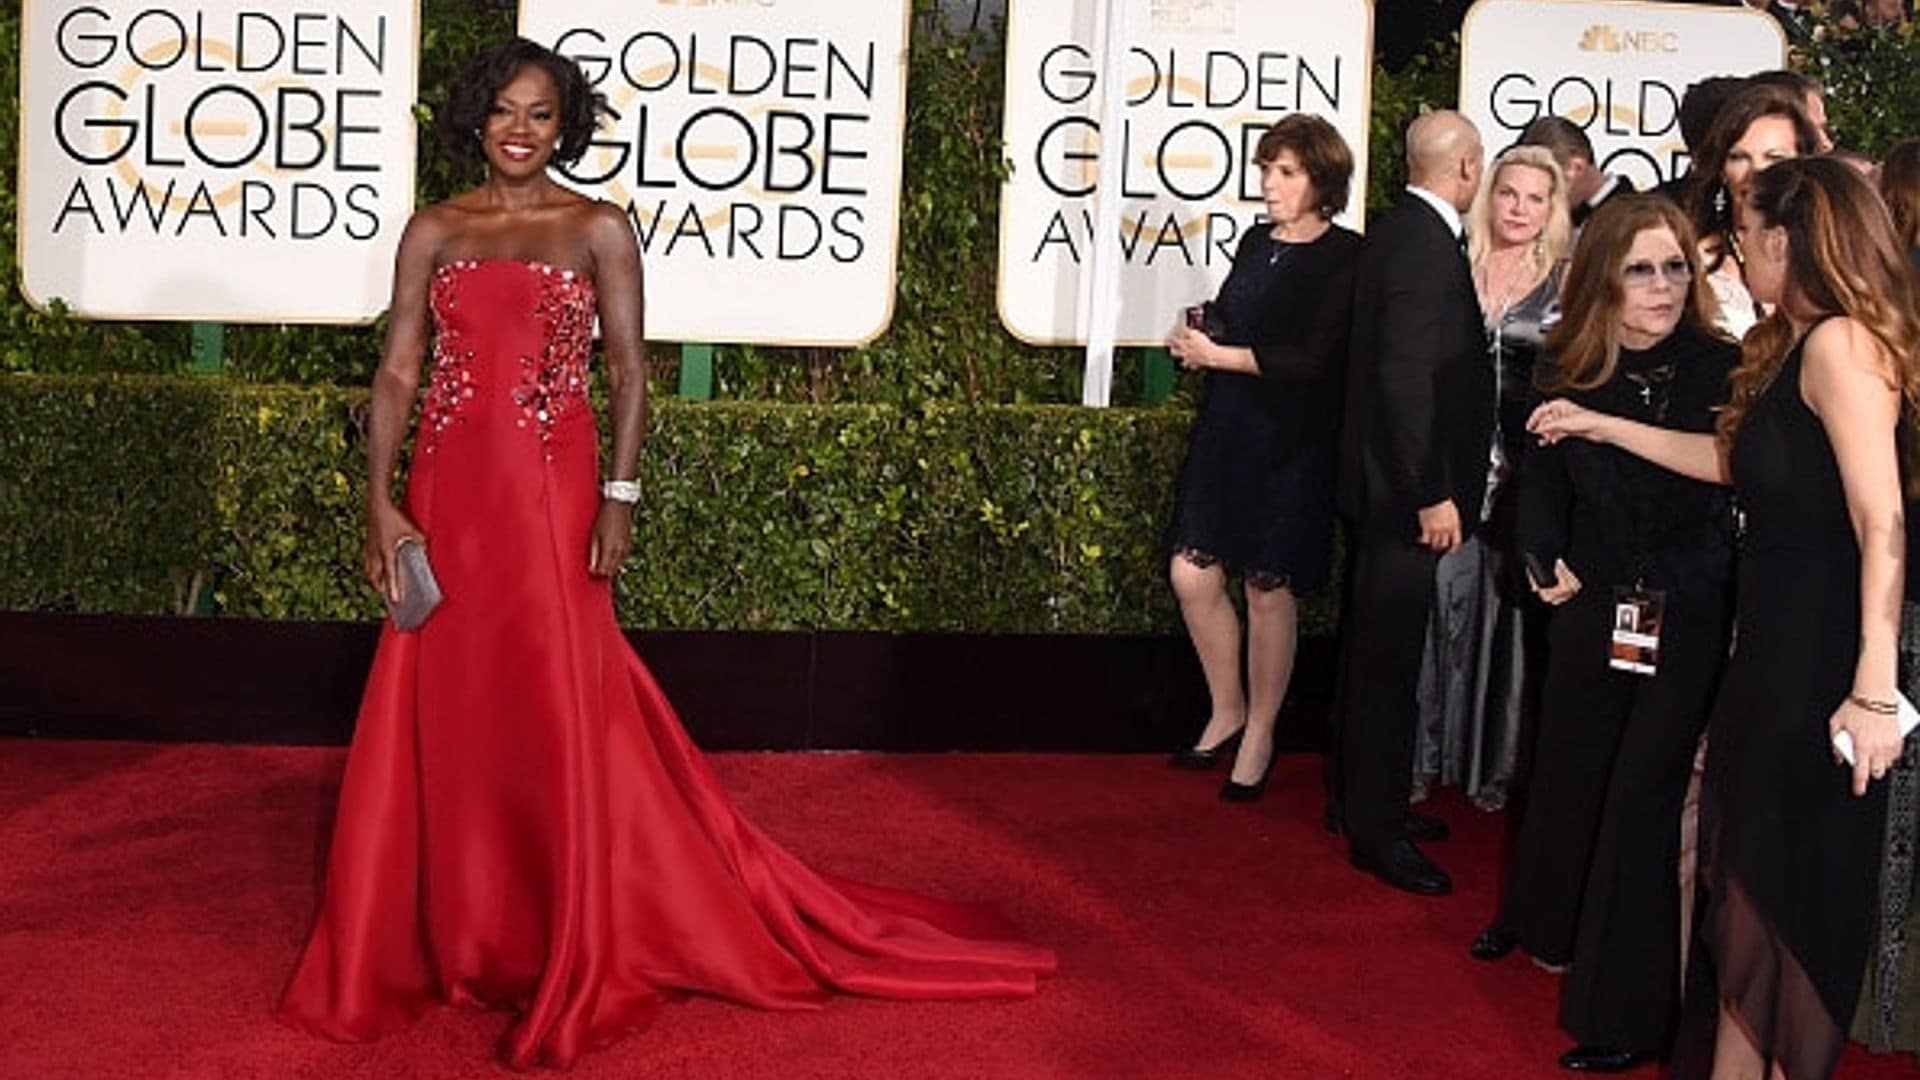 Golden Globes: The most talked-about fashion of the night